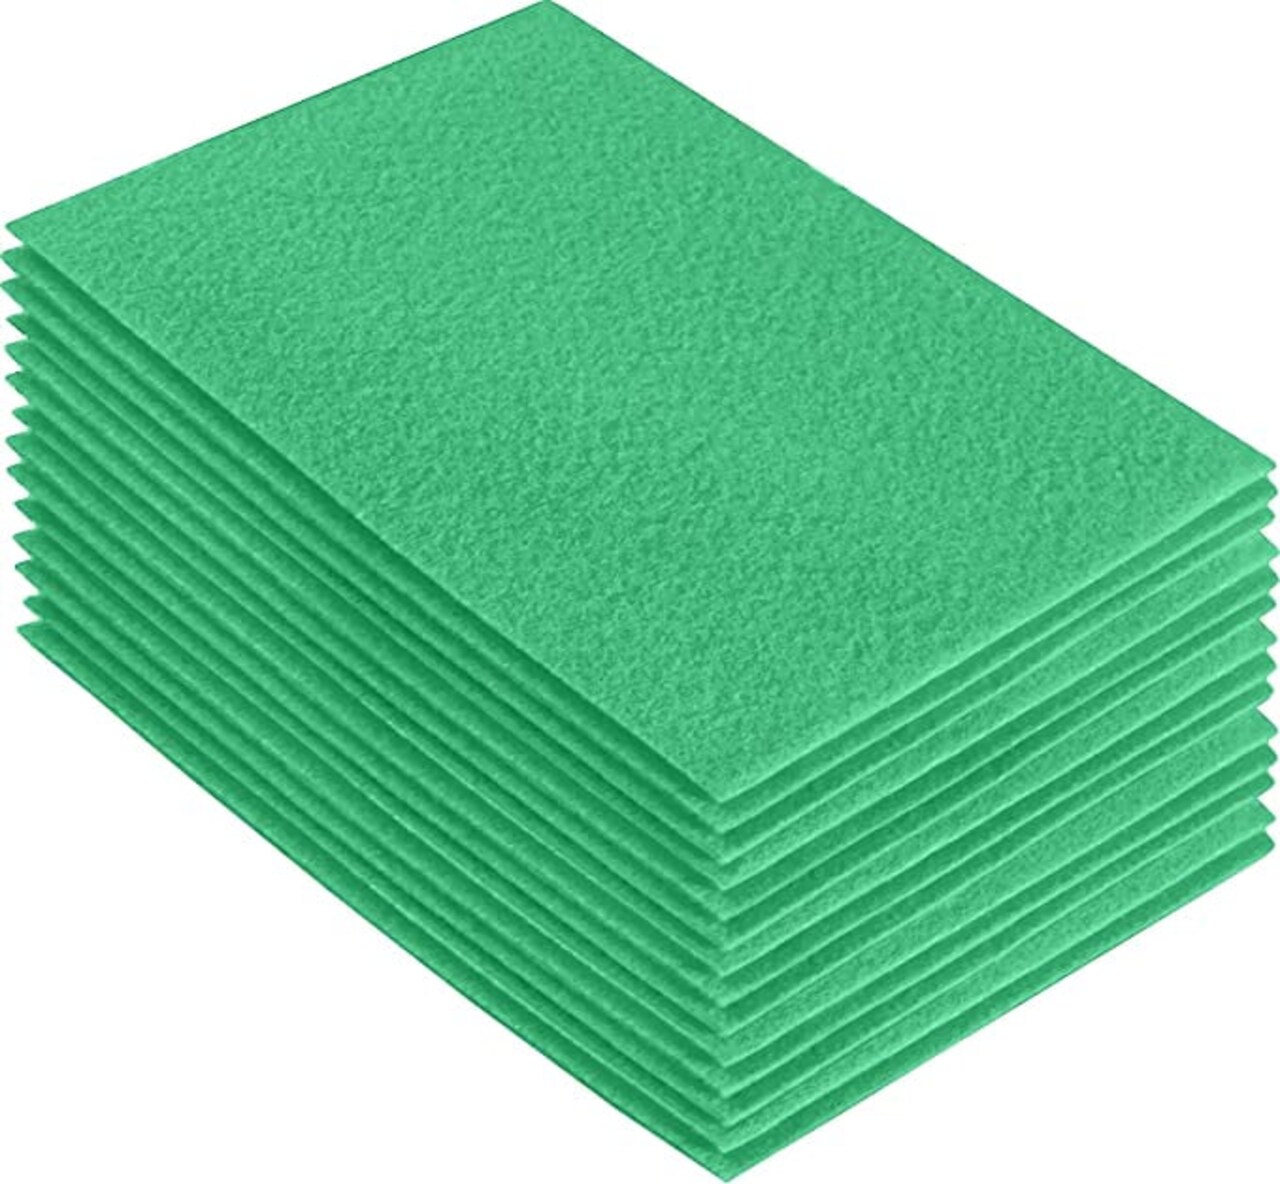 FabricLA Acrylic Felt Sheets For Crafts - Soft Precut 9 X 12 Inches  (22.5cm X 30.5cm) Felt Squares - Use Felt Fabric Craft Sheets for DIY,  Hobby, Costume, And Decoration - Mint, 24 Pieces